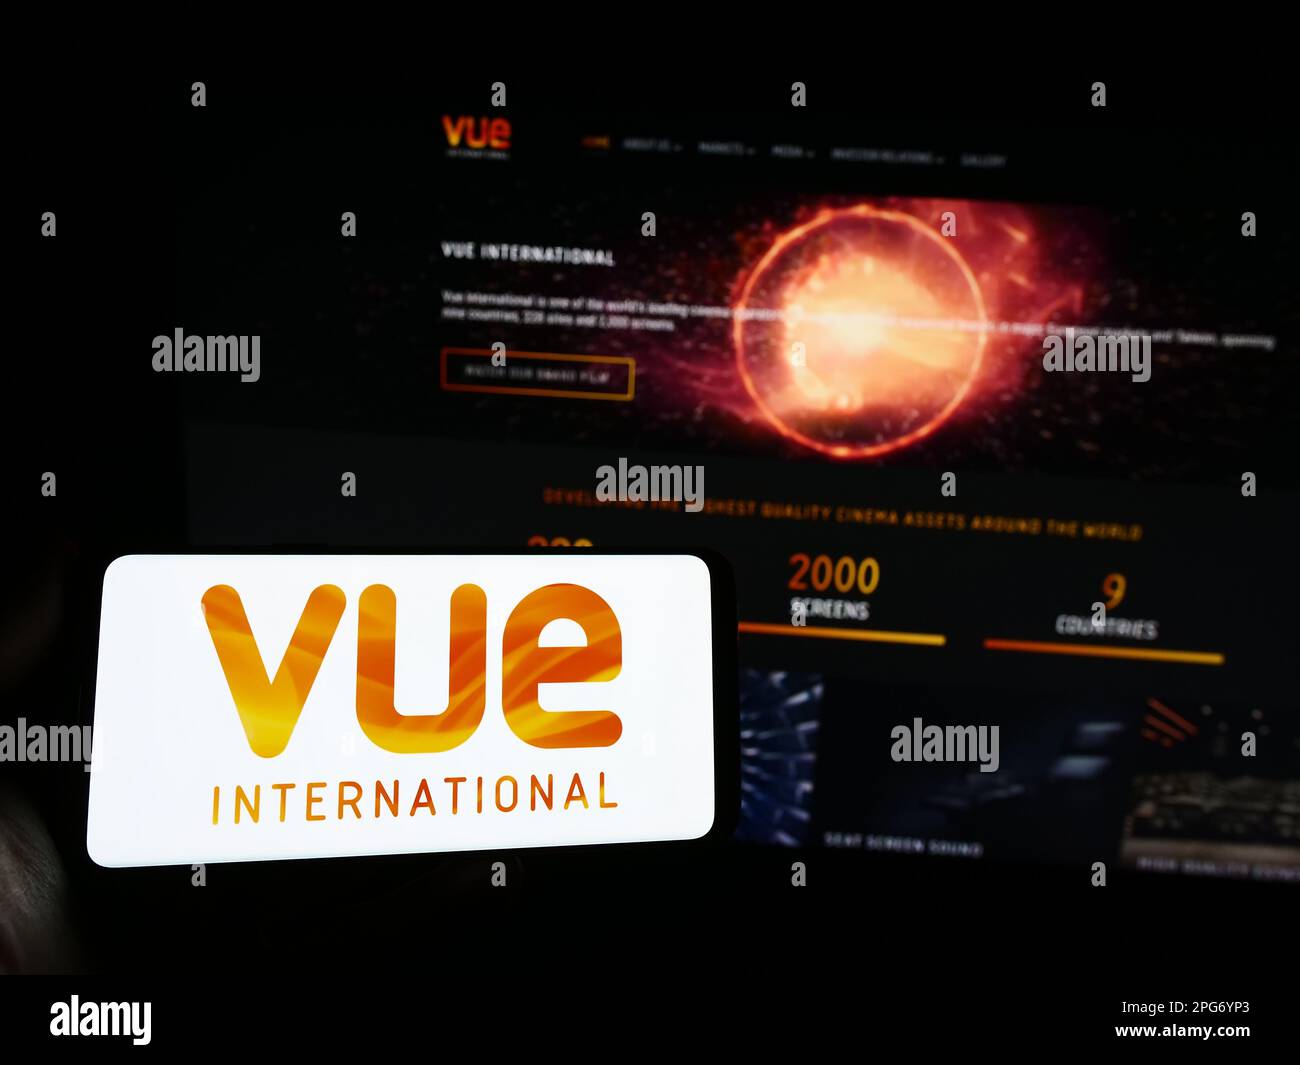 Person holding smartphone with logo of entertainment company Vue International on screen in front of website. Focus on phone display. Stock Photo